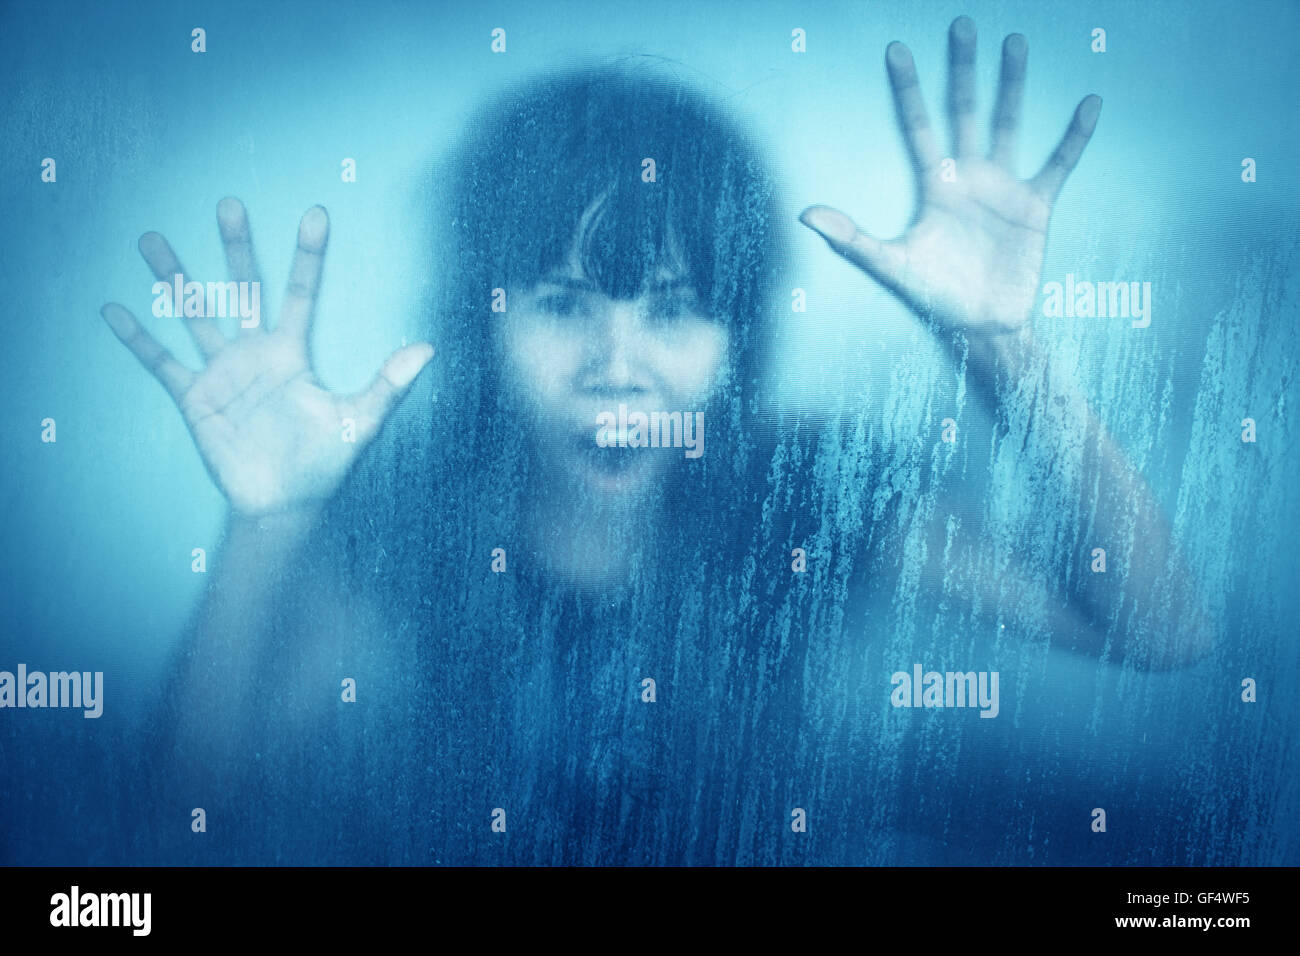 Woman screaming behind stained or dirty window glass,Scary background for book cover Stock Photo